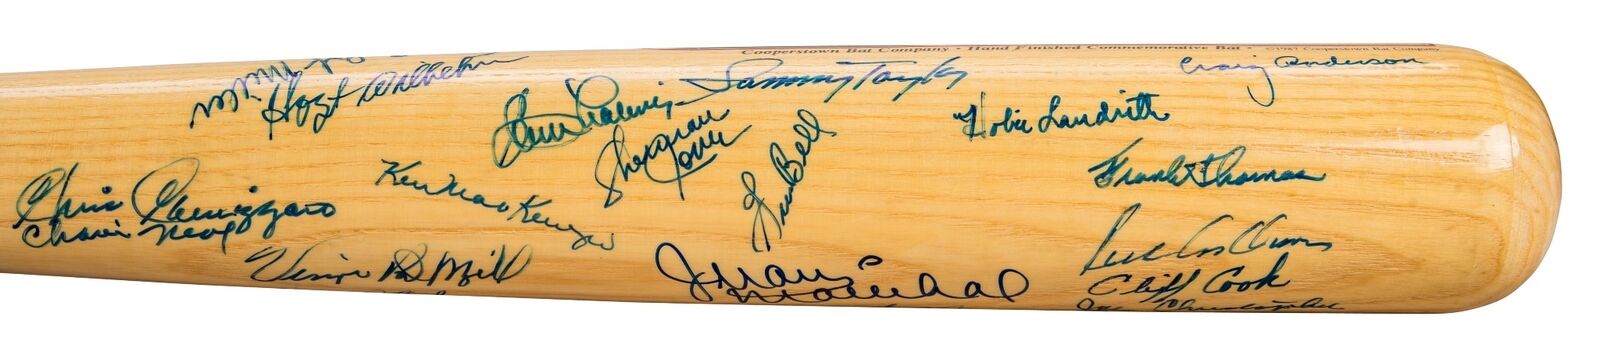 Willie Mays New York Giants Hall Of Fame Signed Cooperstown Bat 32 Sigs JSA COA